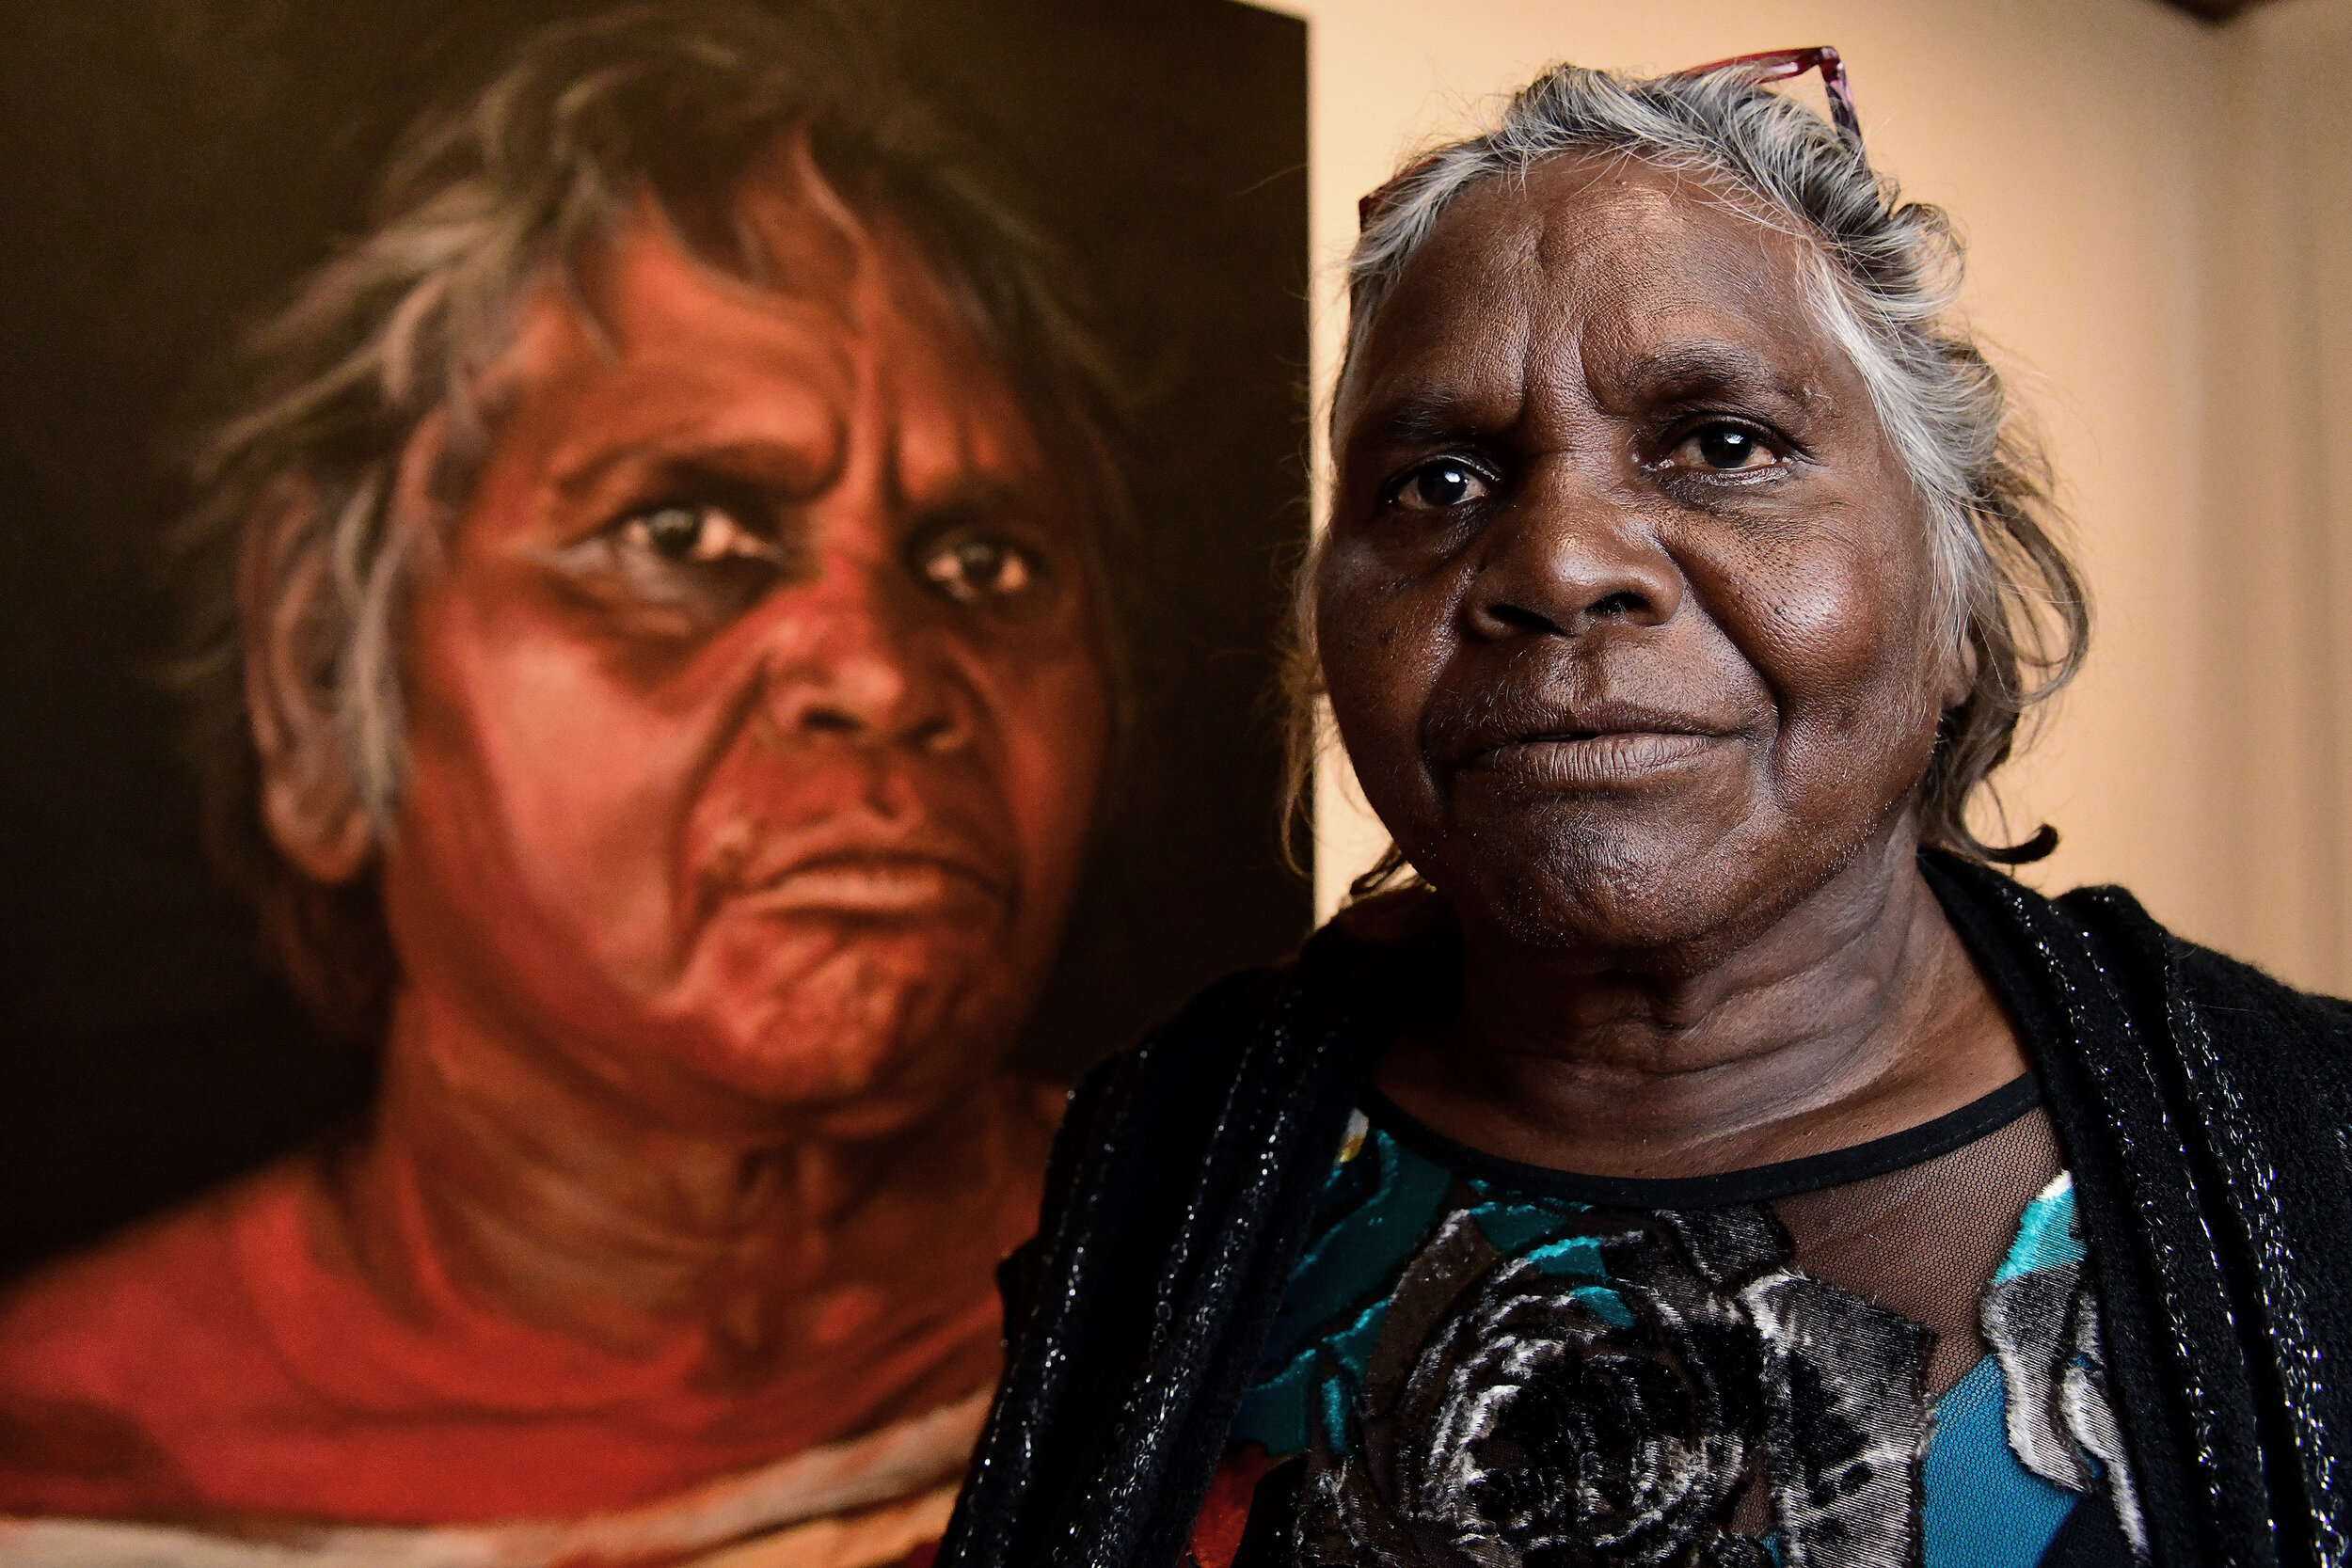  Aboriginal Elder Daisy Tjuparntarri Ward poses for a photograph in front of artist David Darcy's portrait of her at the Art Gallery of NSW, Sydney, Wednesday, August 14, 2019. David Darcy's portrait of Daisy, 'Tjuparntarri - Women's Business', has w